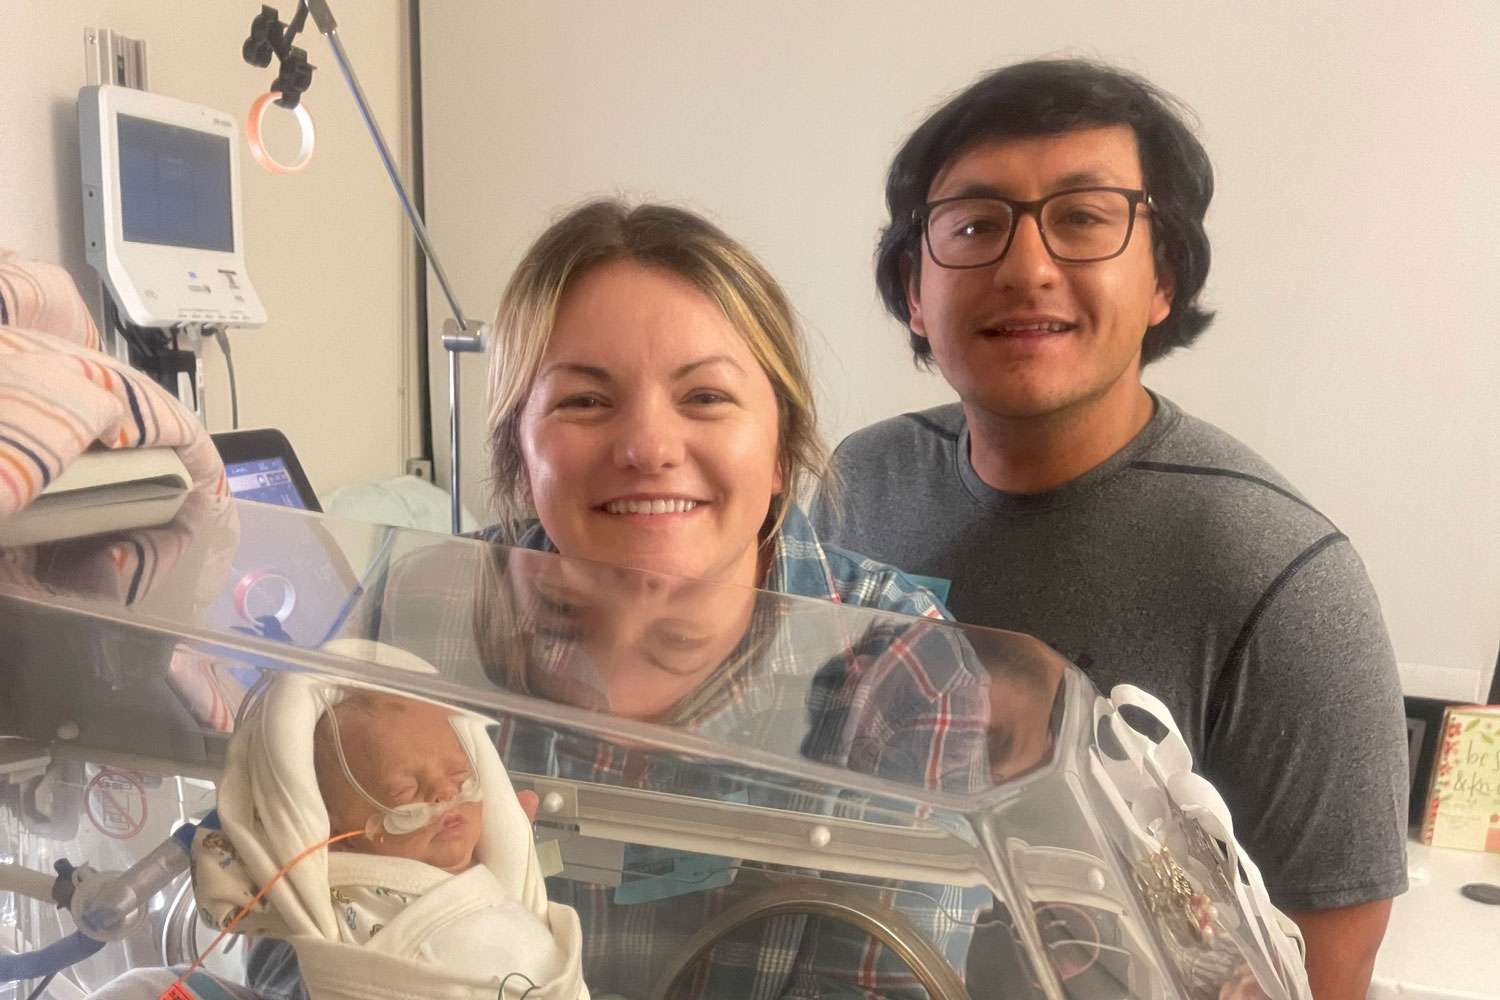 Baby Born Weighing 1.5 Lbs. Defies the Odds, Giving Mom Extra Special Mother’s Day: 'Best Gift'